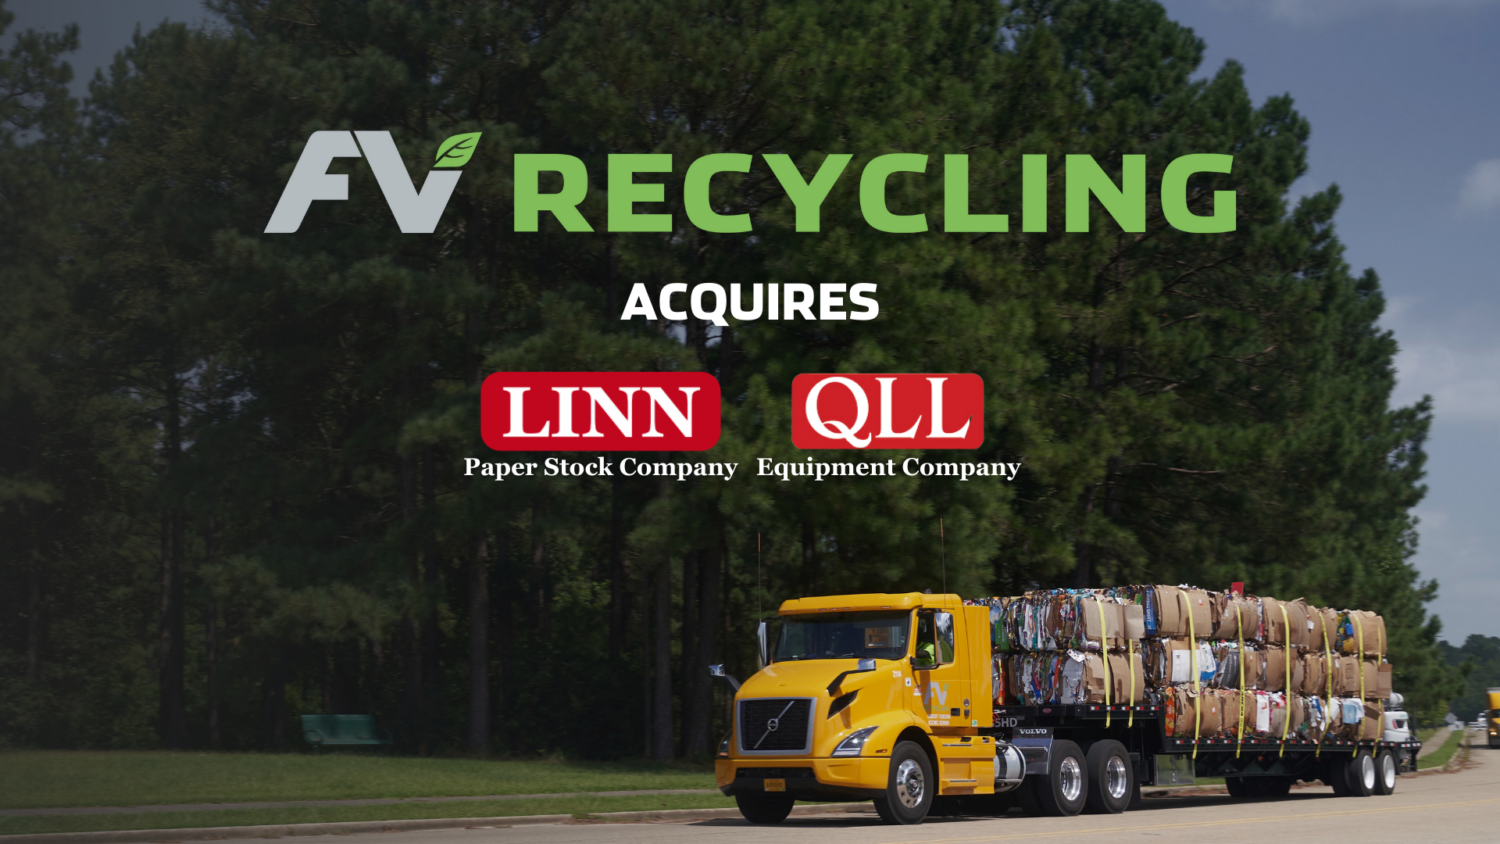 FV Recycling Acquisition